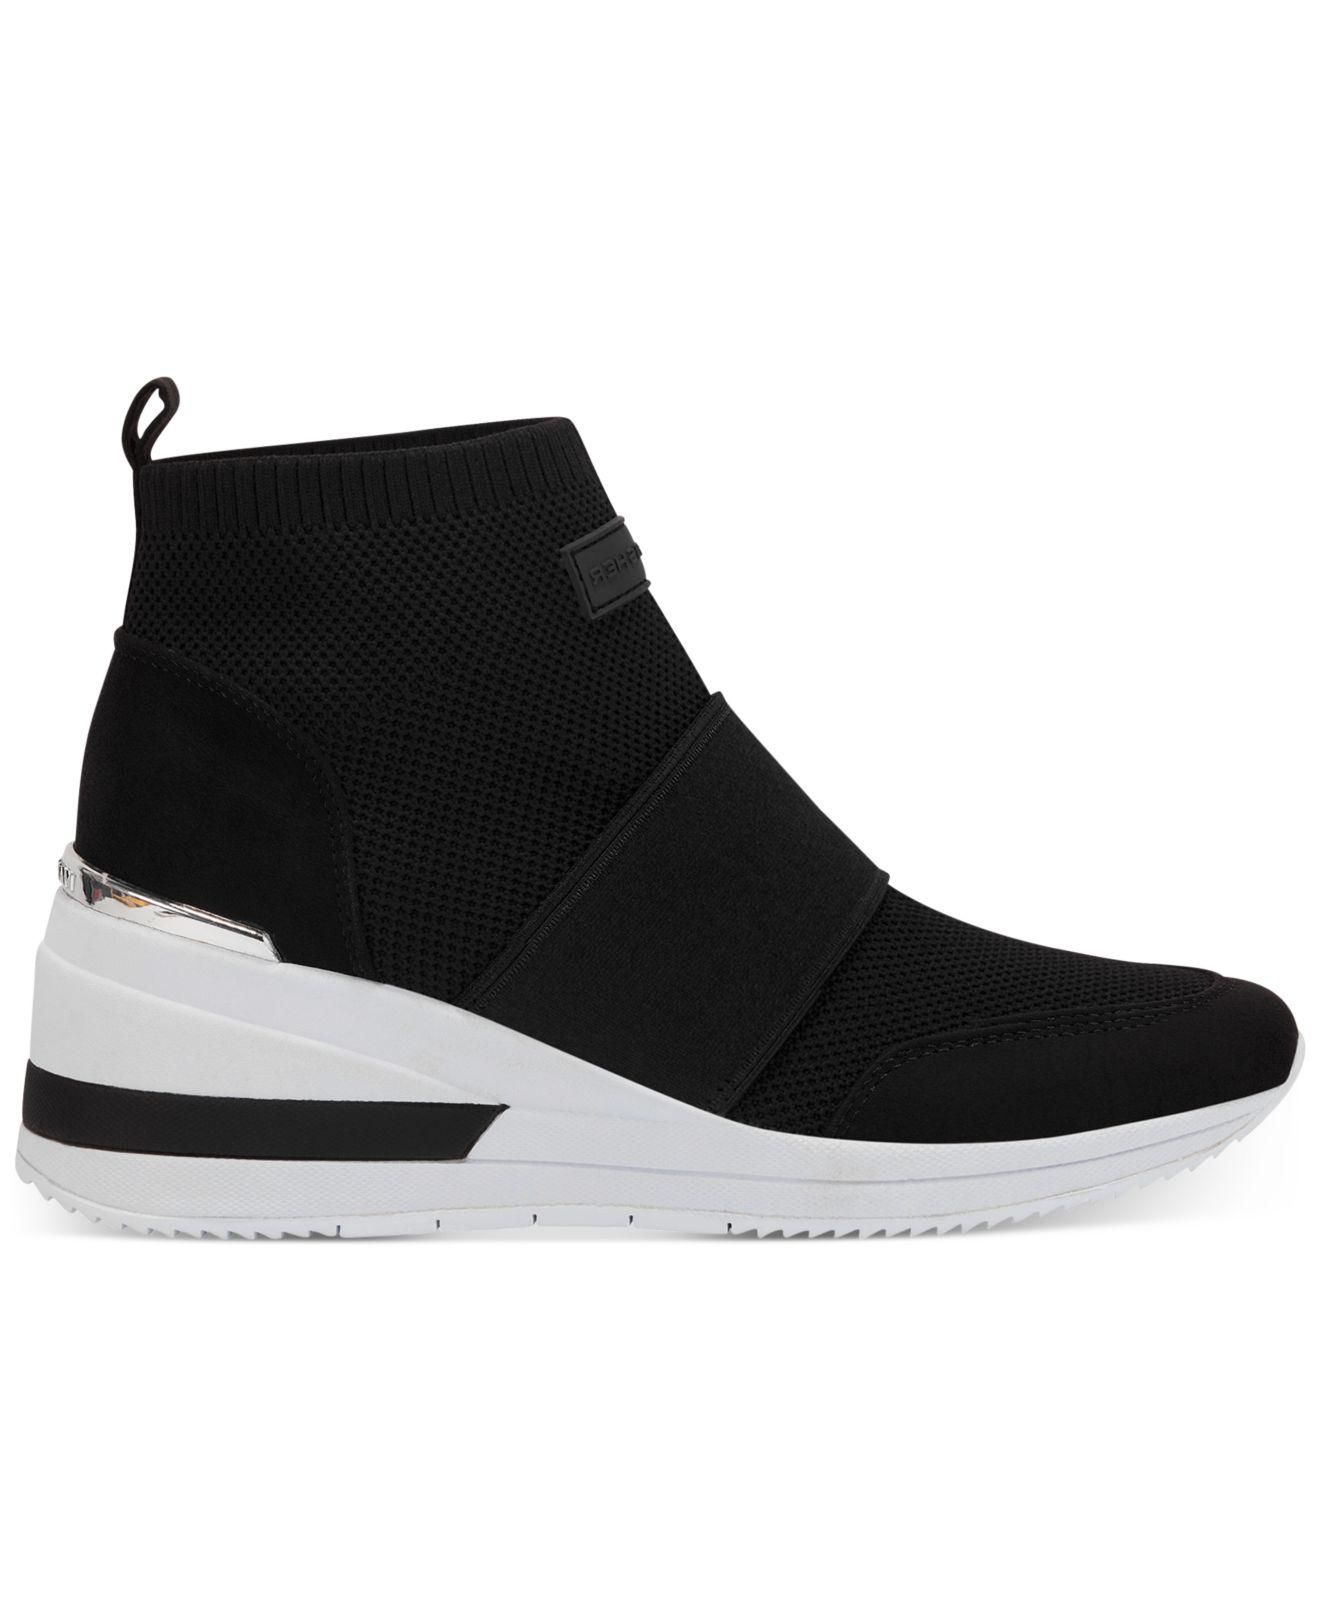 Marc Fisher Muscle Knit Wedge Sneakers in Black - Lyst